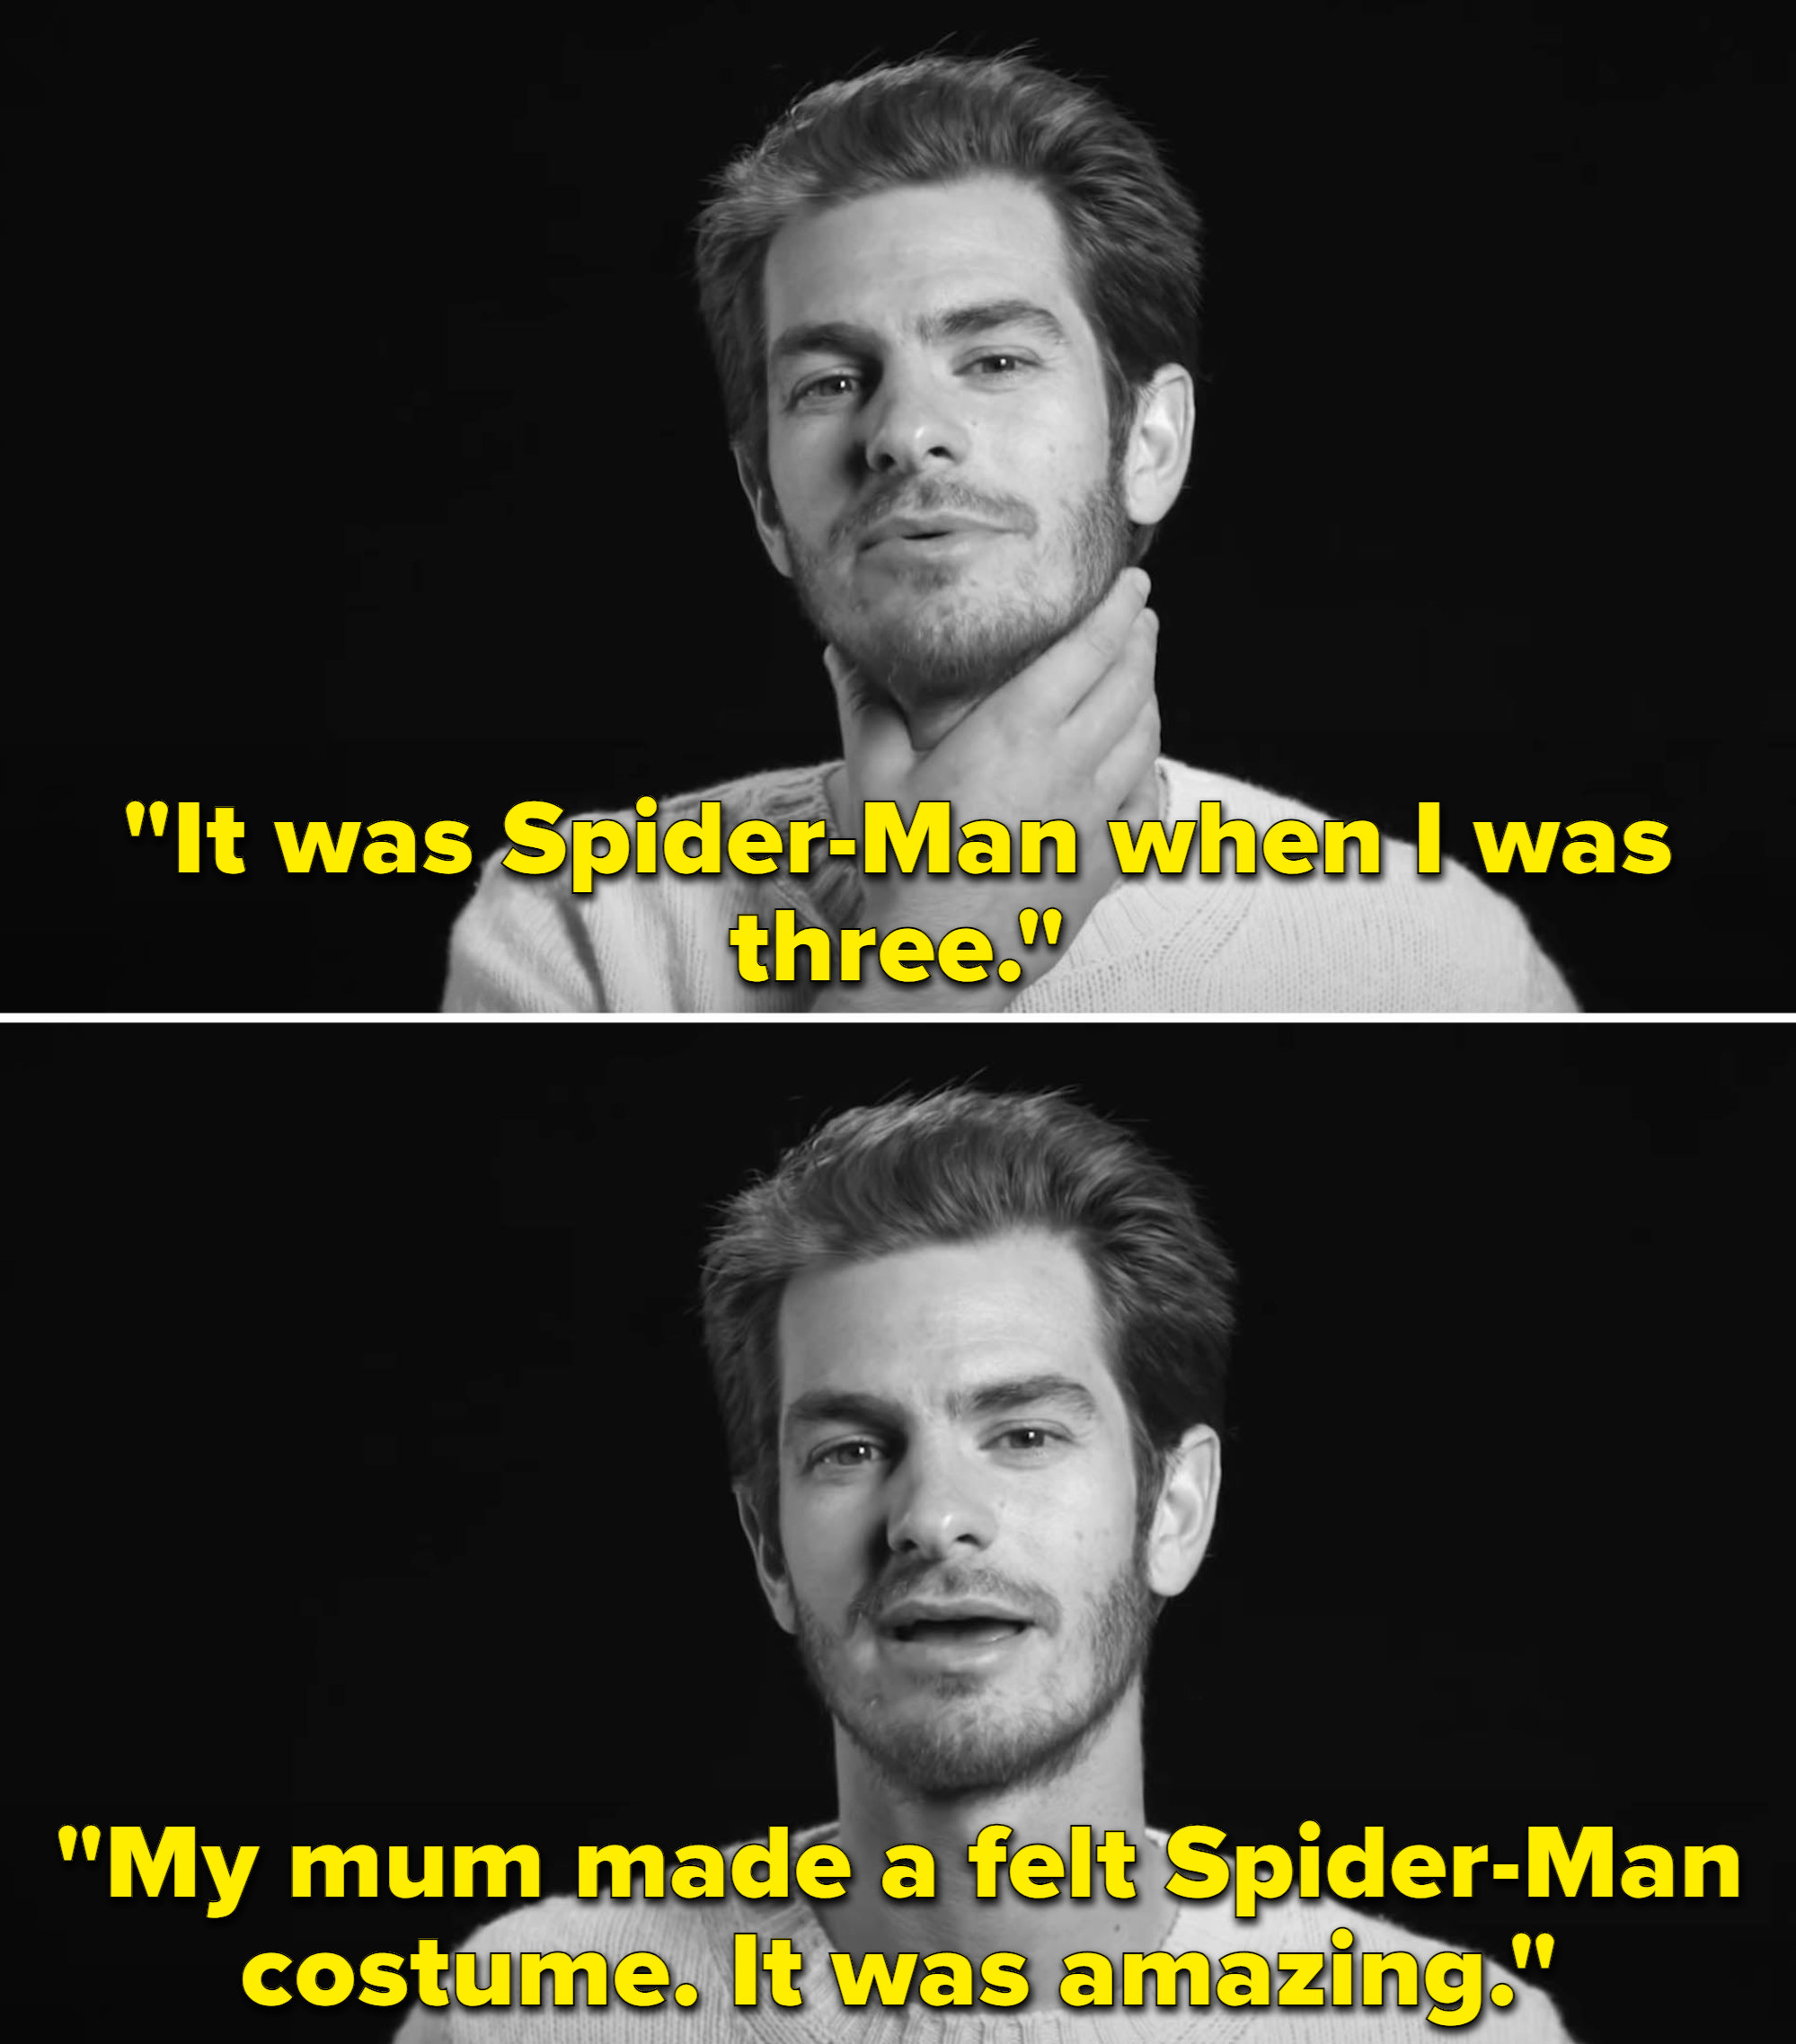 Andrew explaining that his mom made a Spider-Man costume for him out of felt